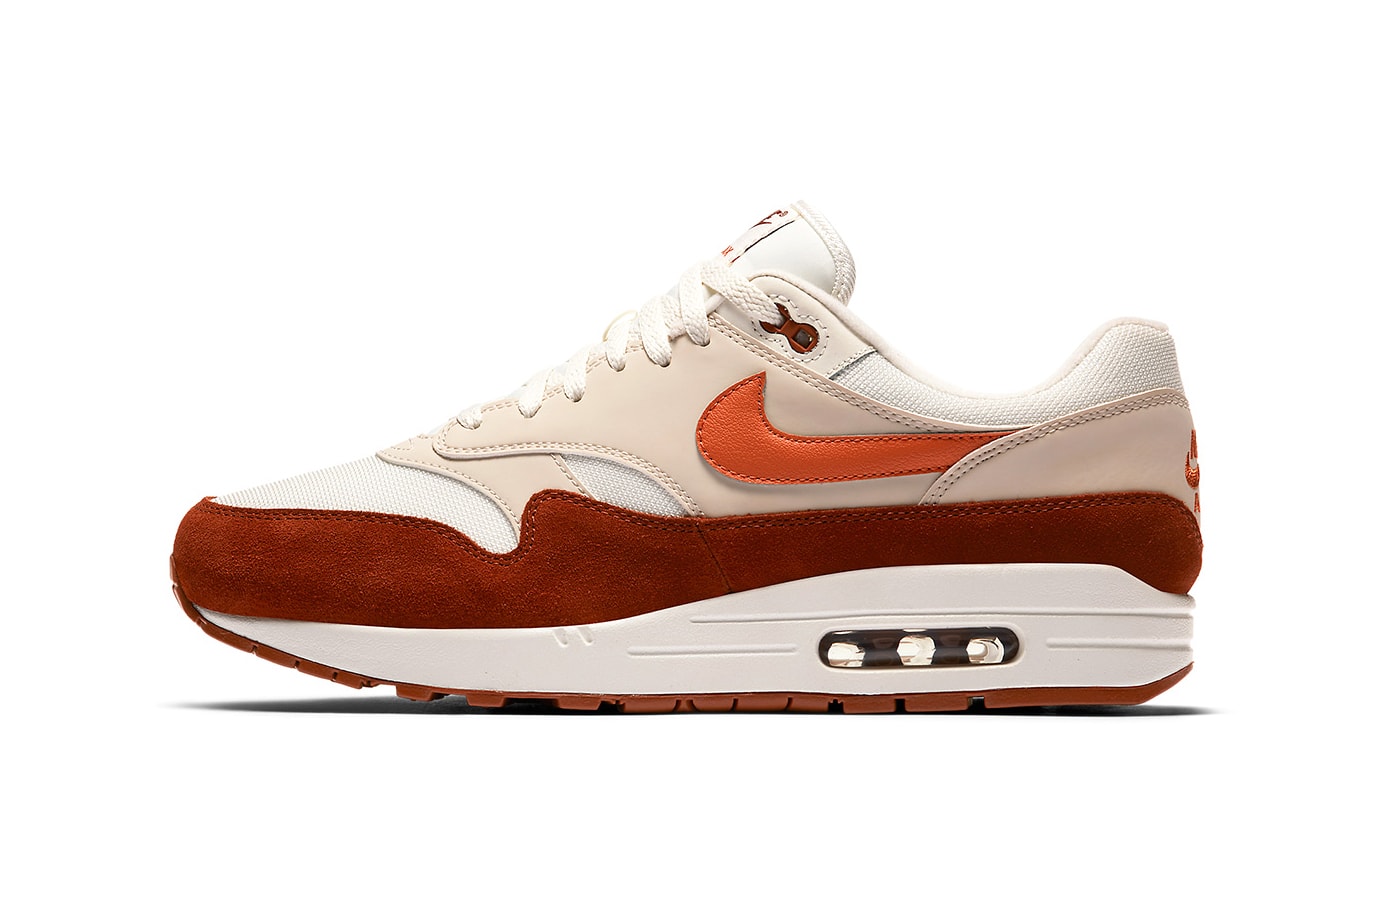 Nike Air Max 1 Curry 2.0 Official Images atmos Brown Orange White